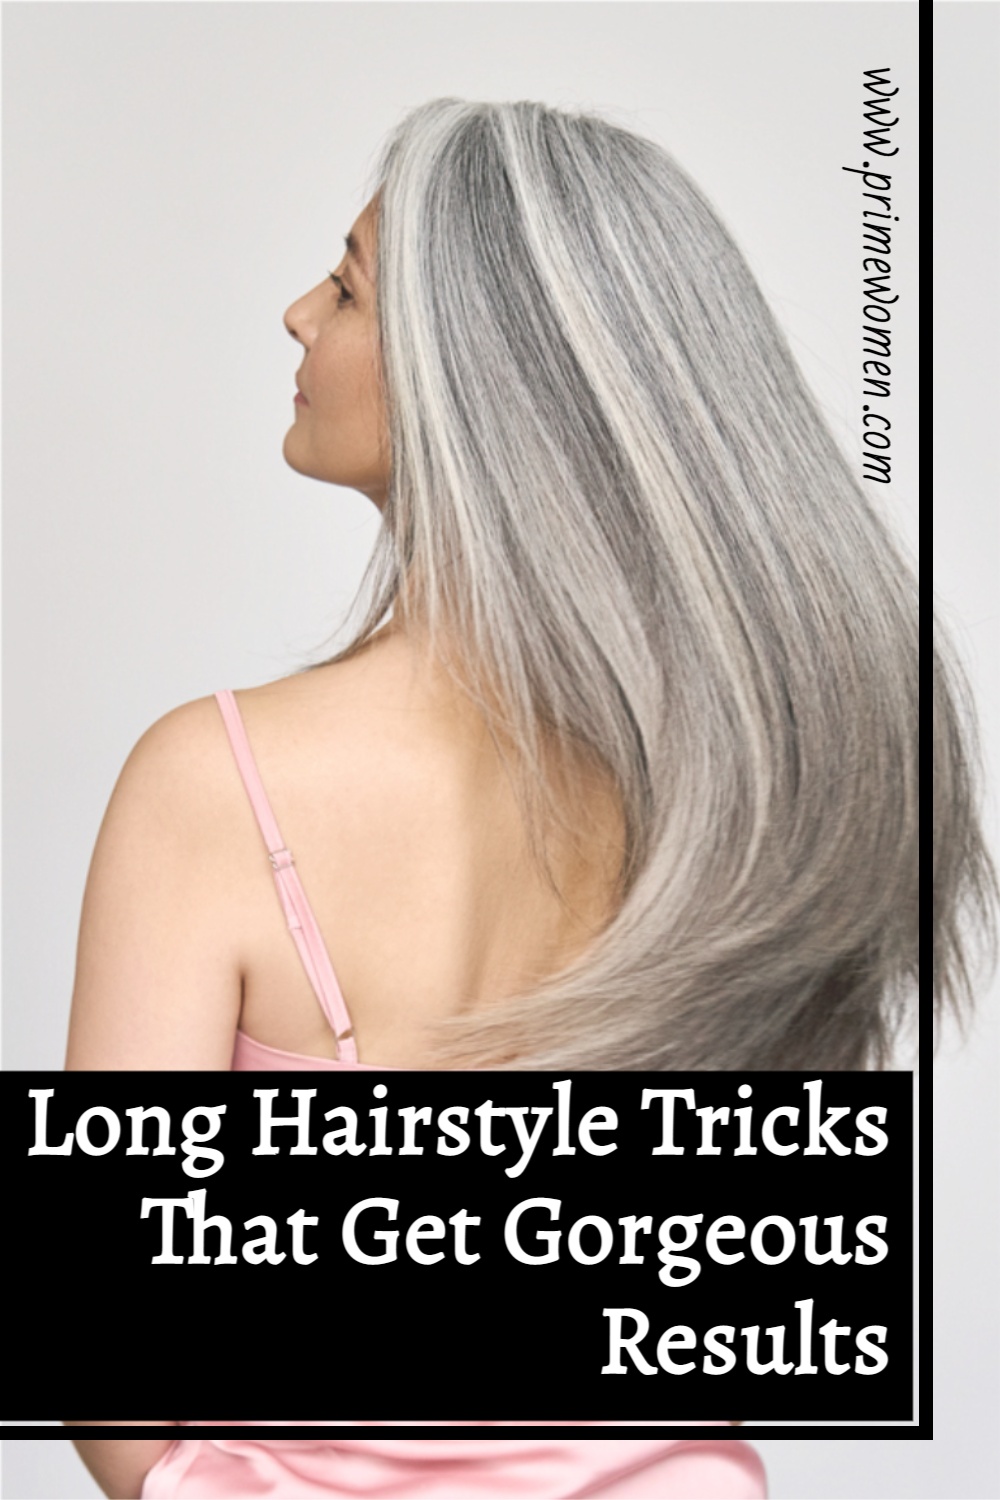 Long-Hairstyle-Tricks-That-Get-Gorgeous-Results